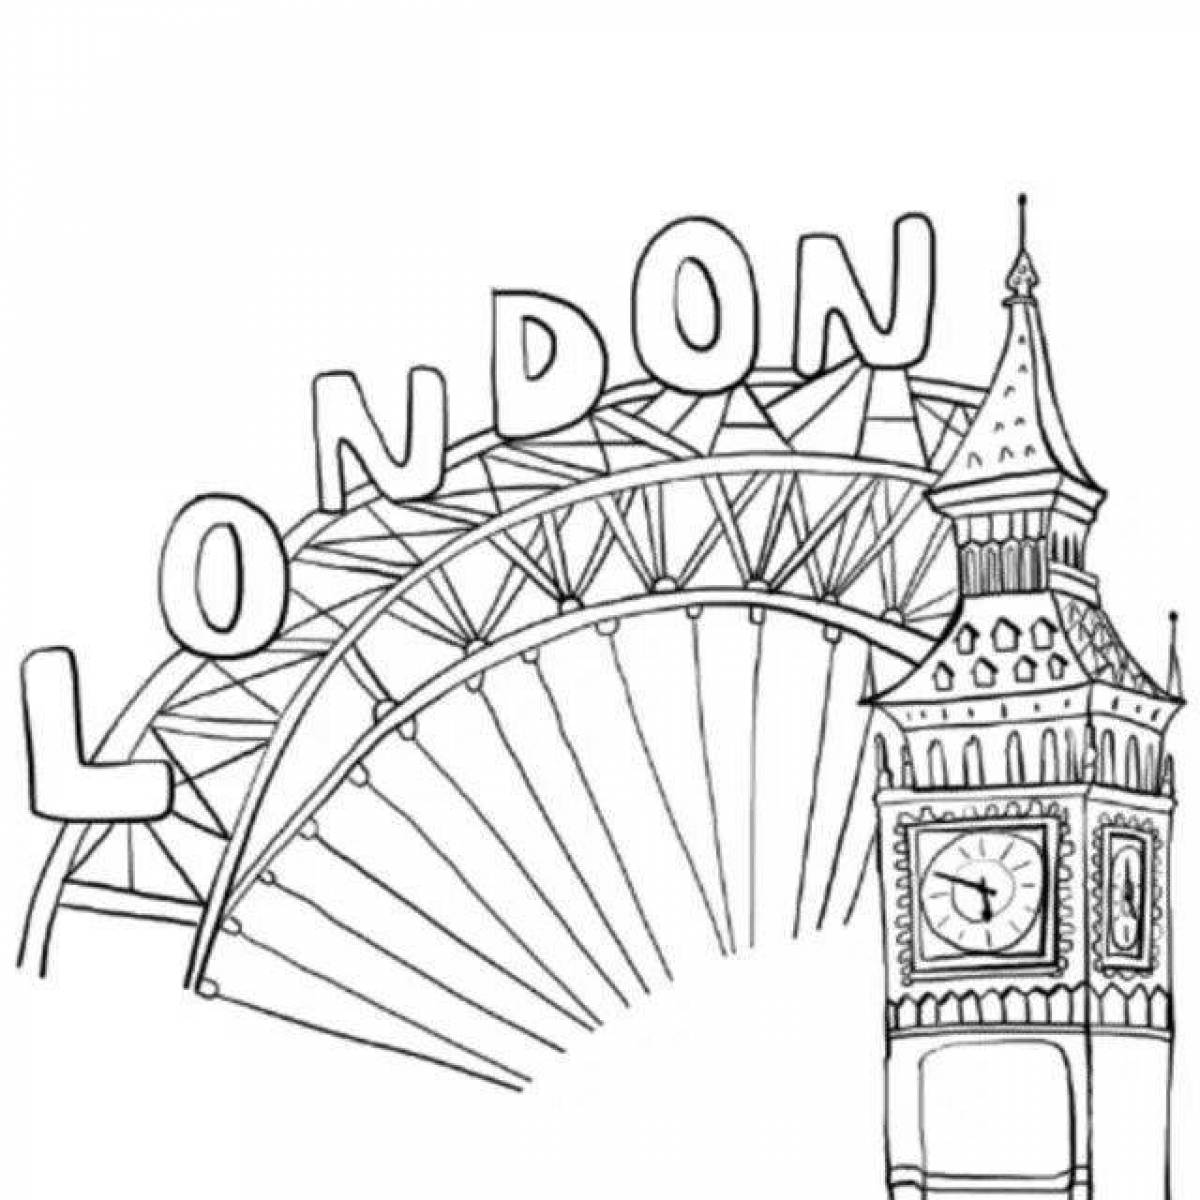 London's dazzling sights coloring page